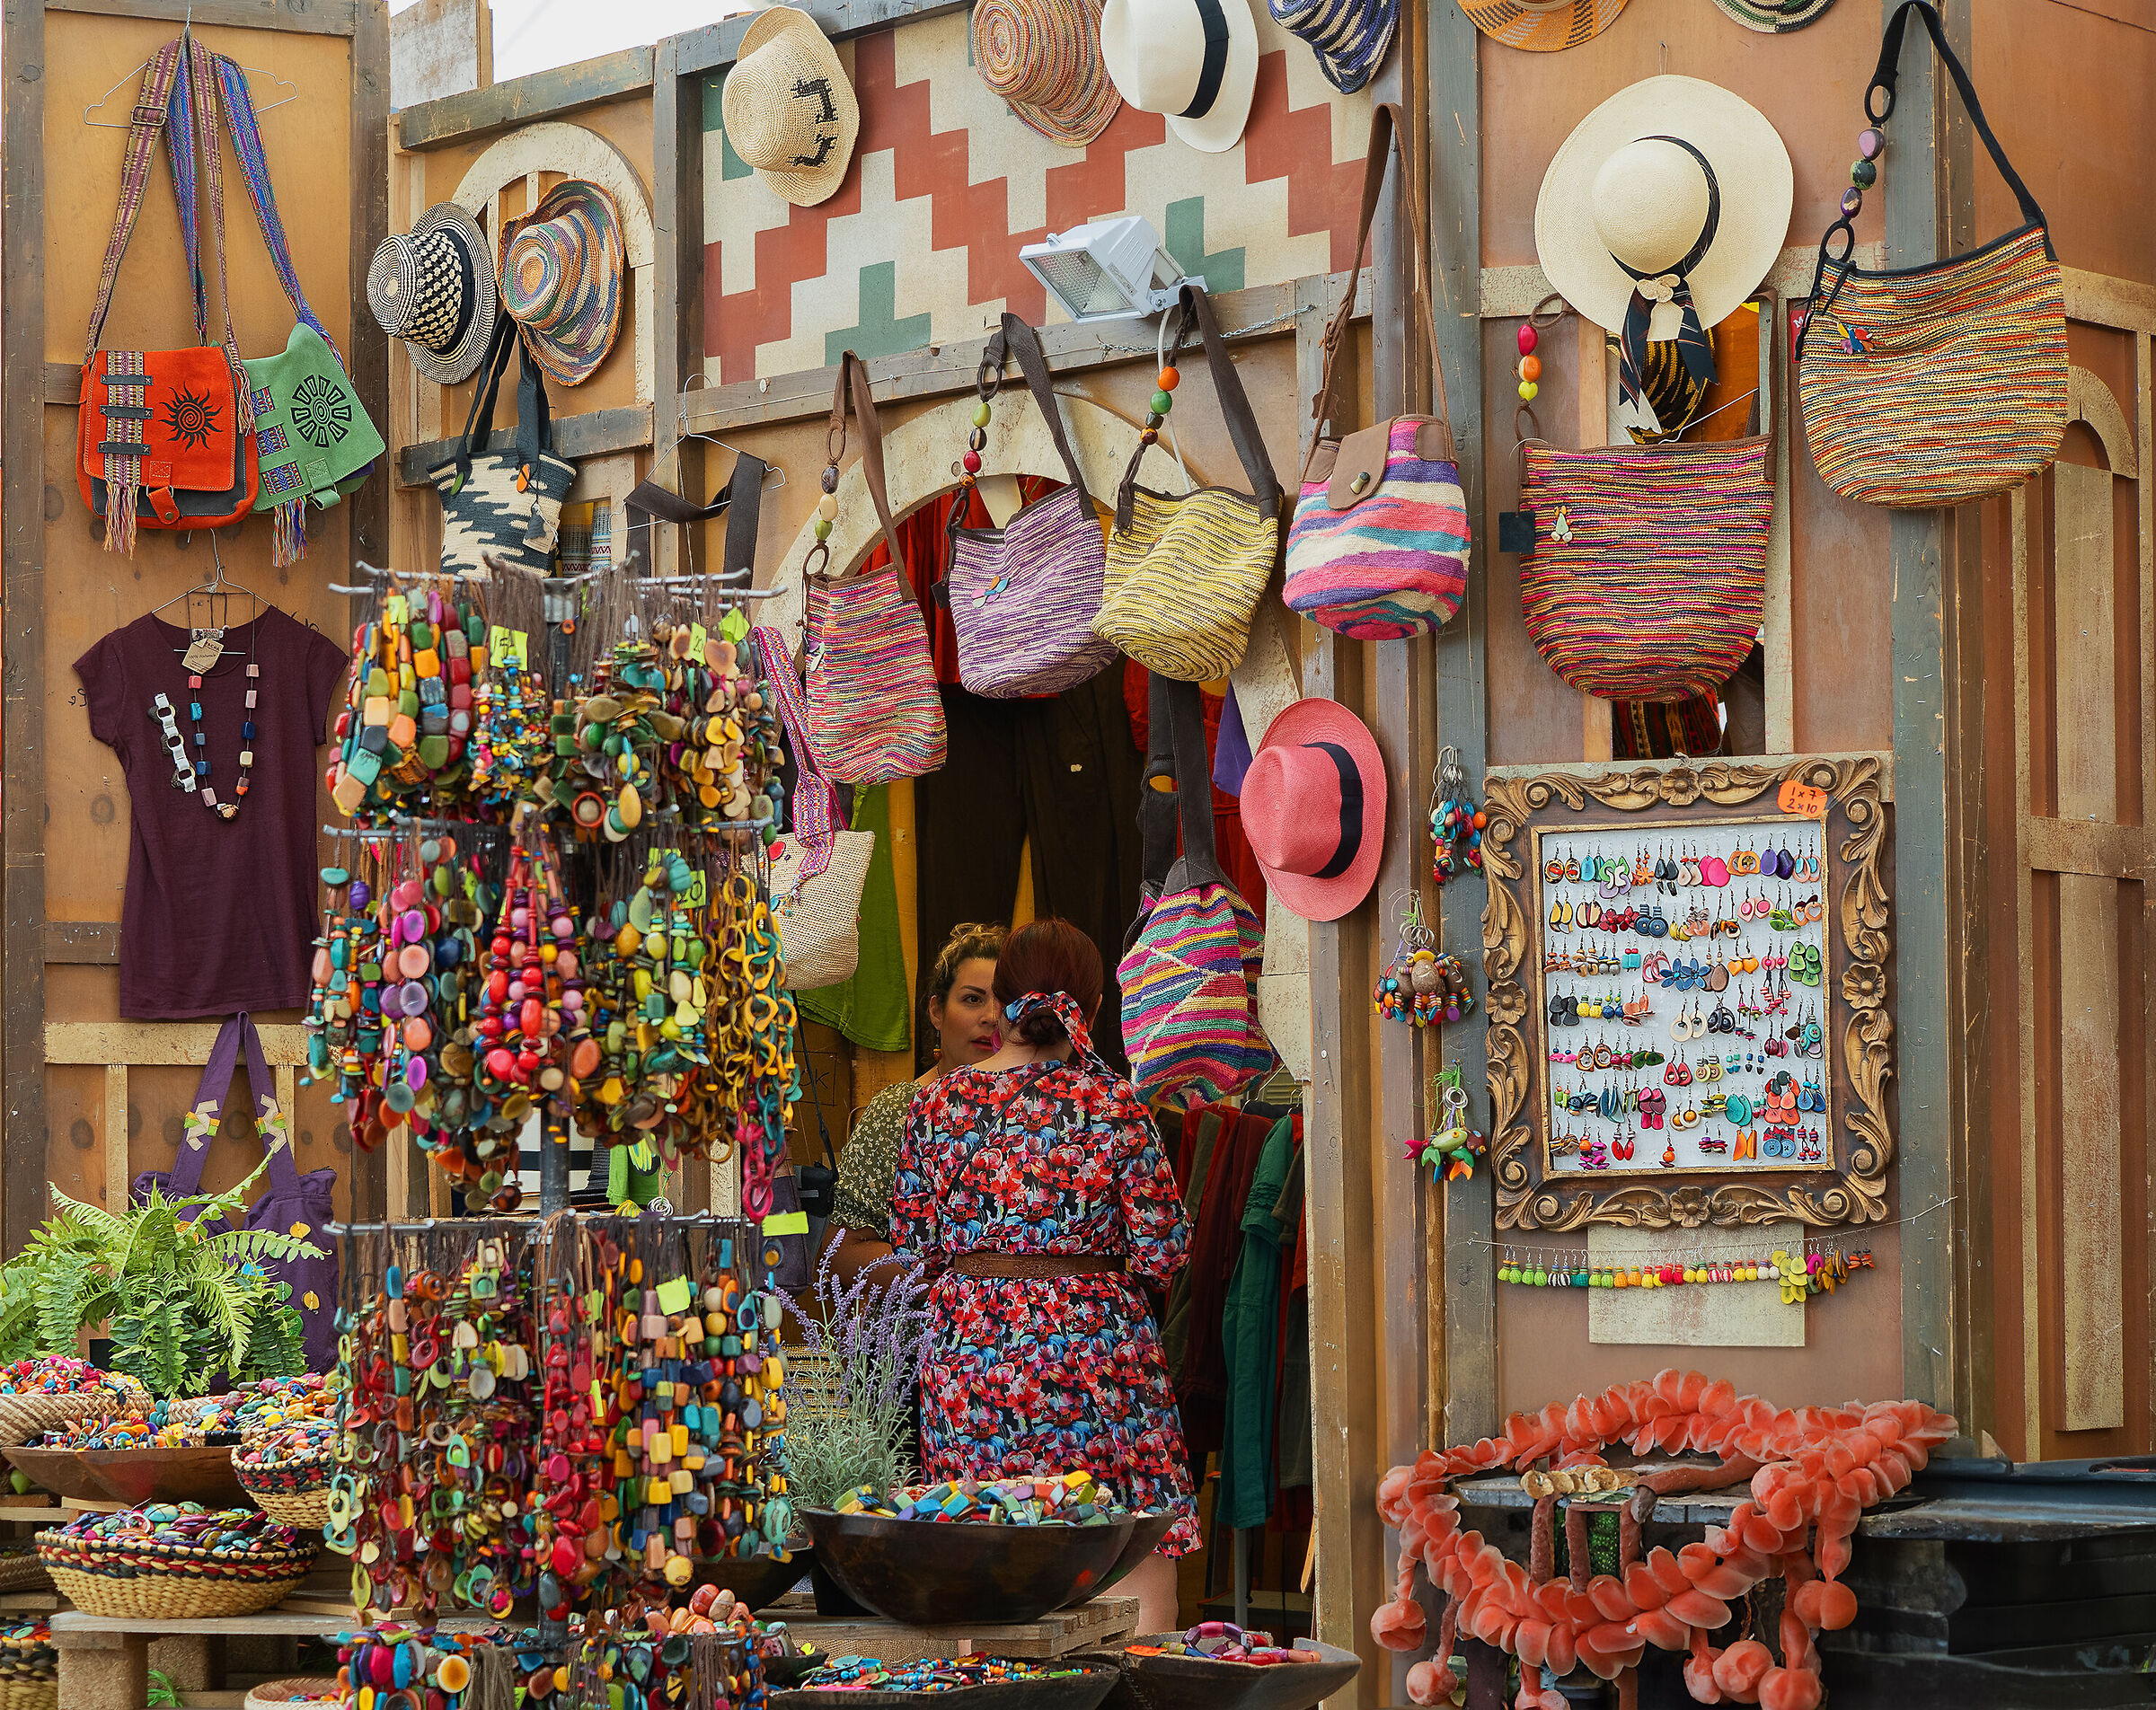 The colors of the Souk...